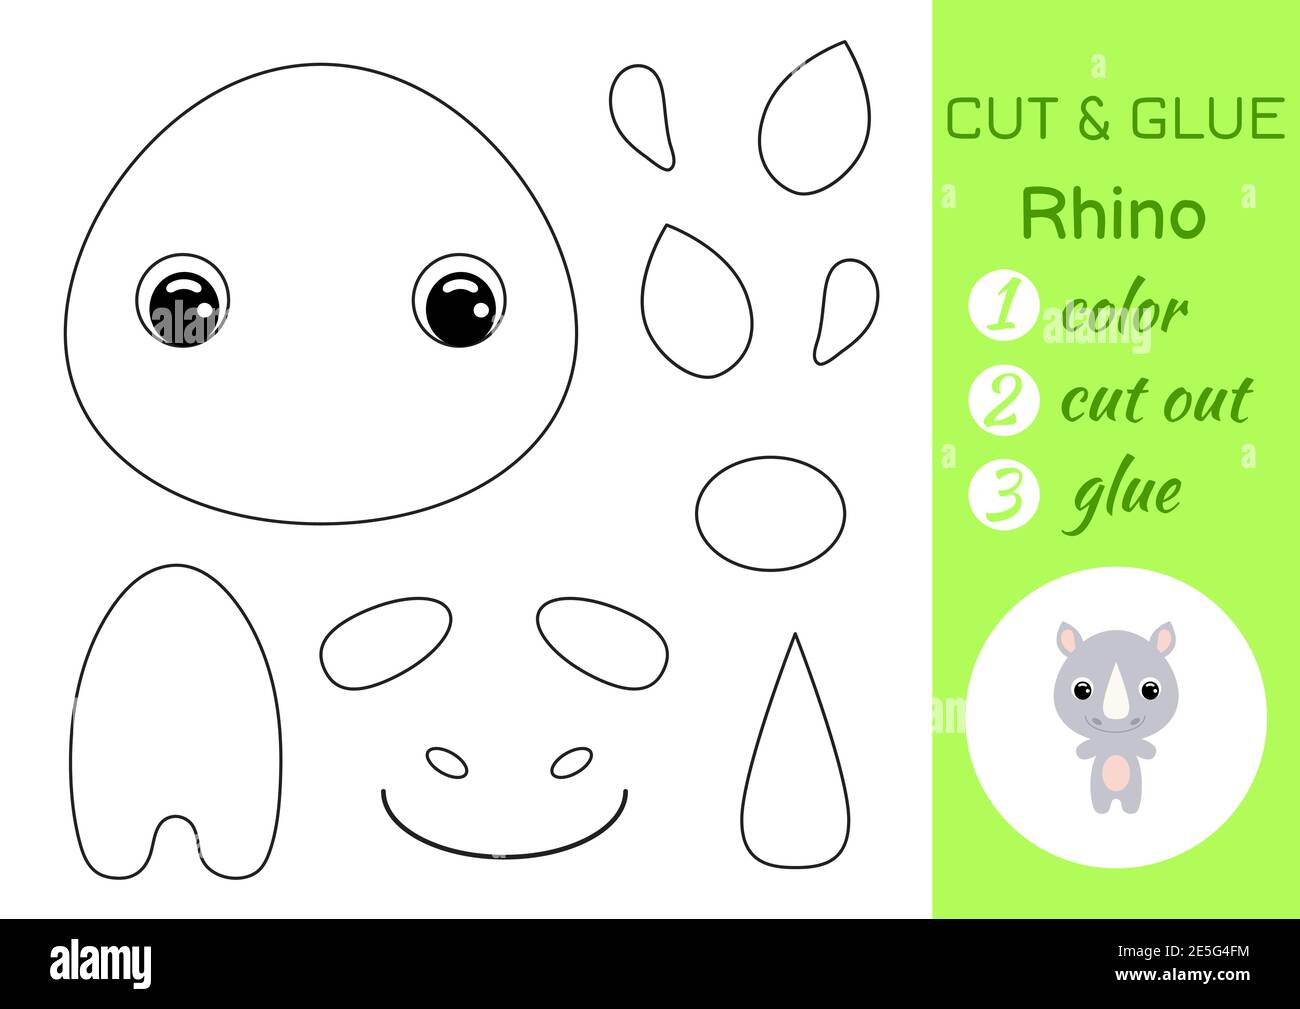 Coloring book cut and glue baby rhino. Educational paper game for preschool children. Cut and Paste Worksheet. Color, cut parts and glue on paper. Stock Vector